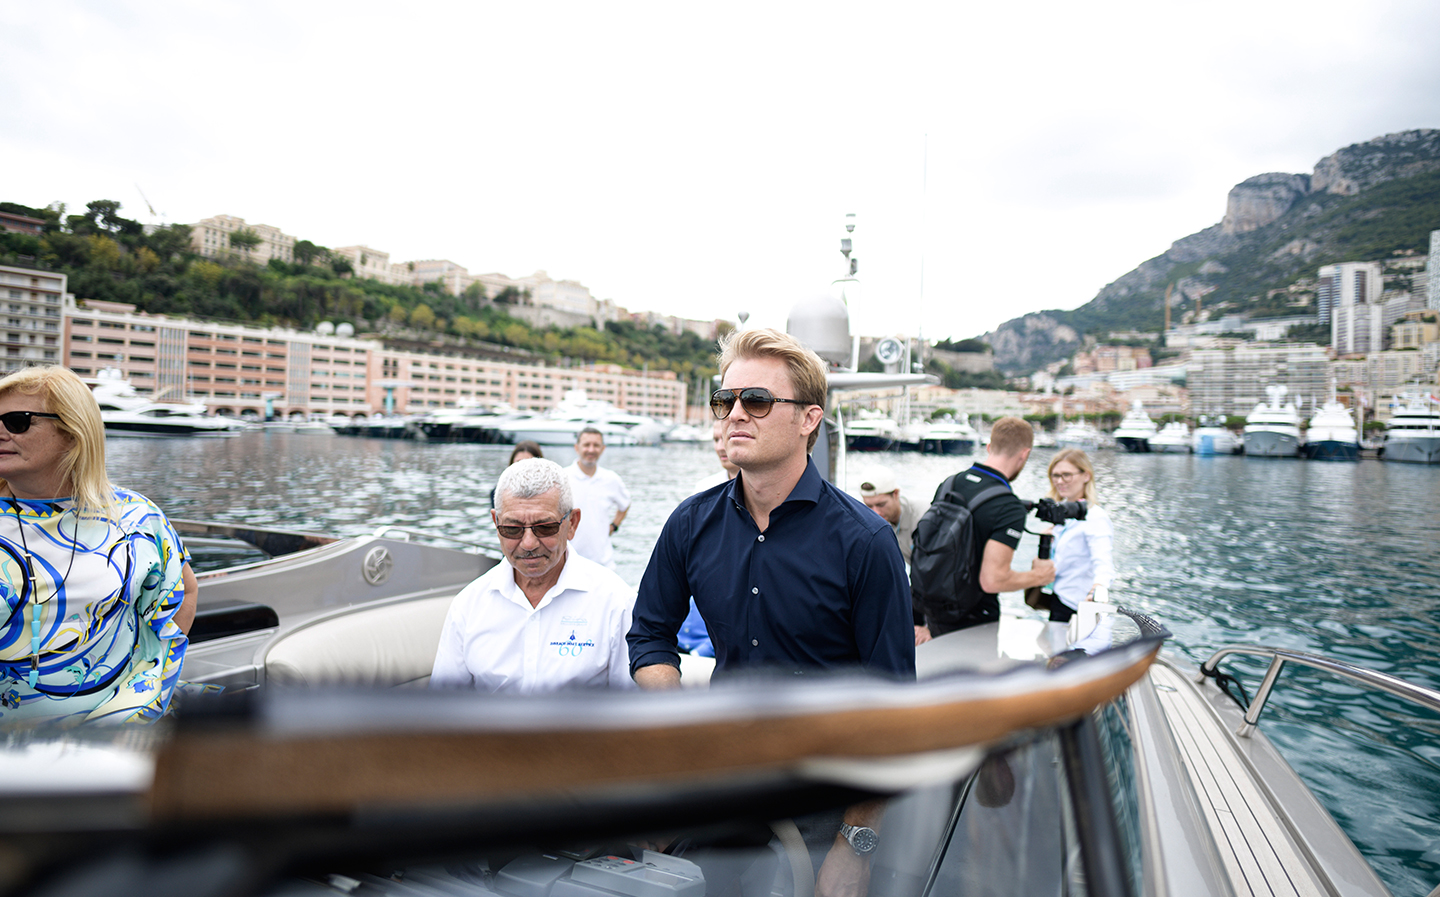 Drivin' with Nico Rosberg rally 2019 - feature by Times Luxx's David Green for Driving.co.uk - Rosberg driving a Riva boat at Monaco